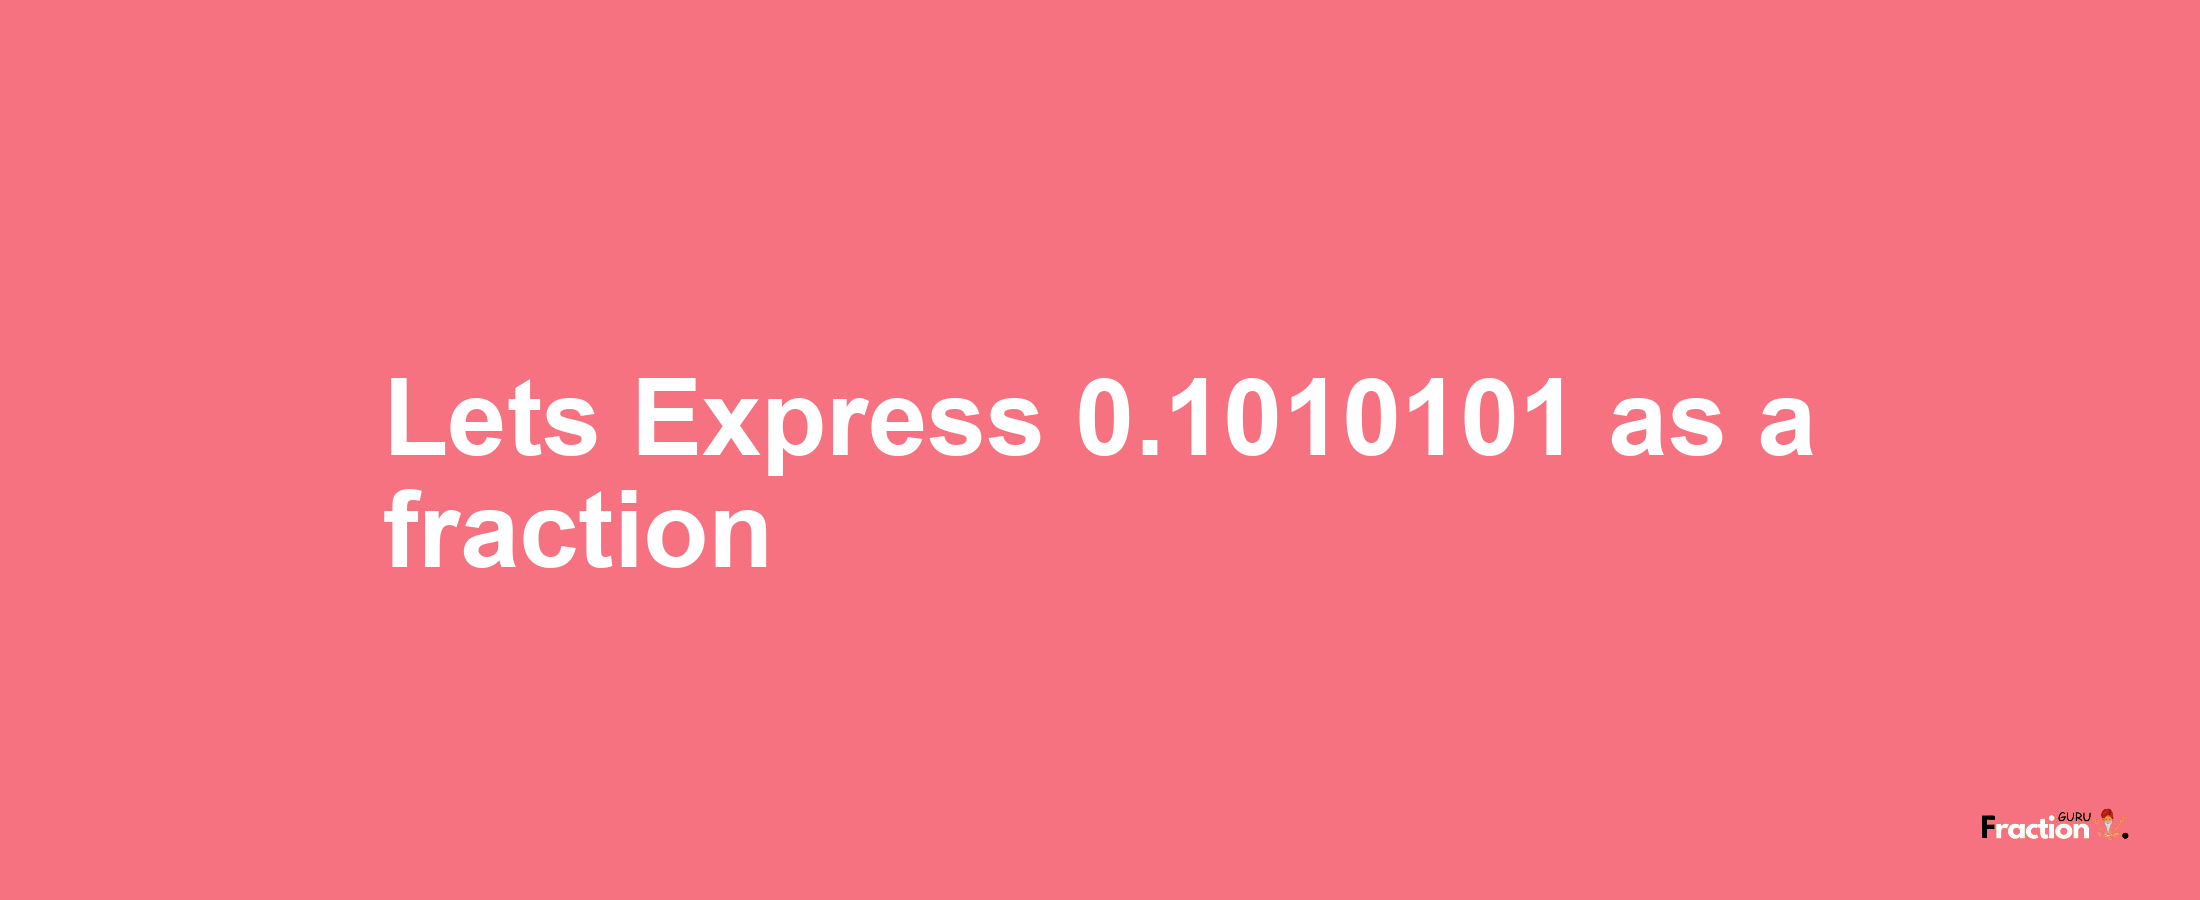 Lets Express 0.1010101 as afraction